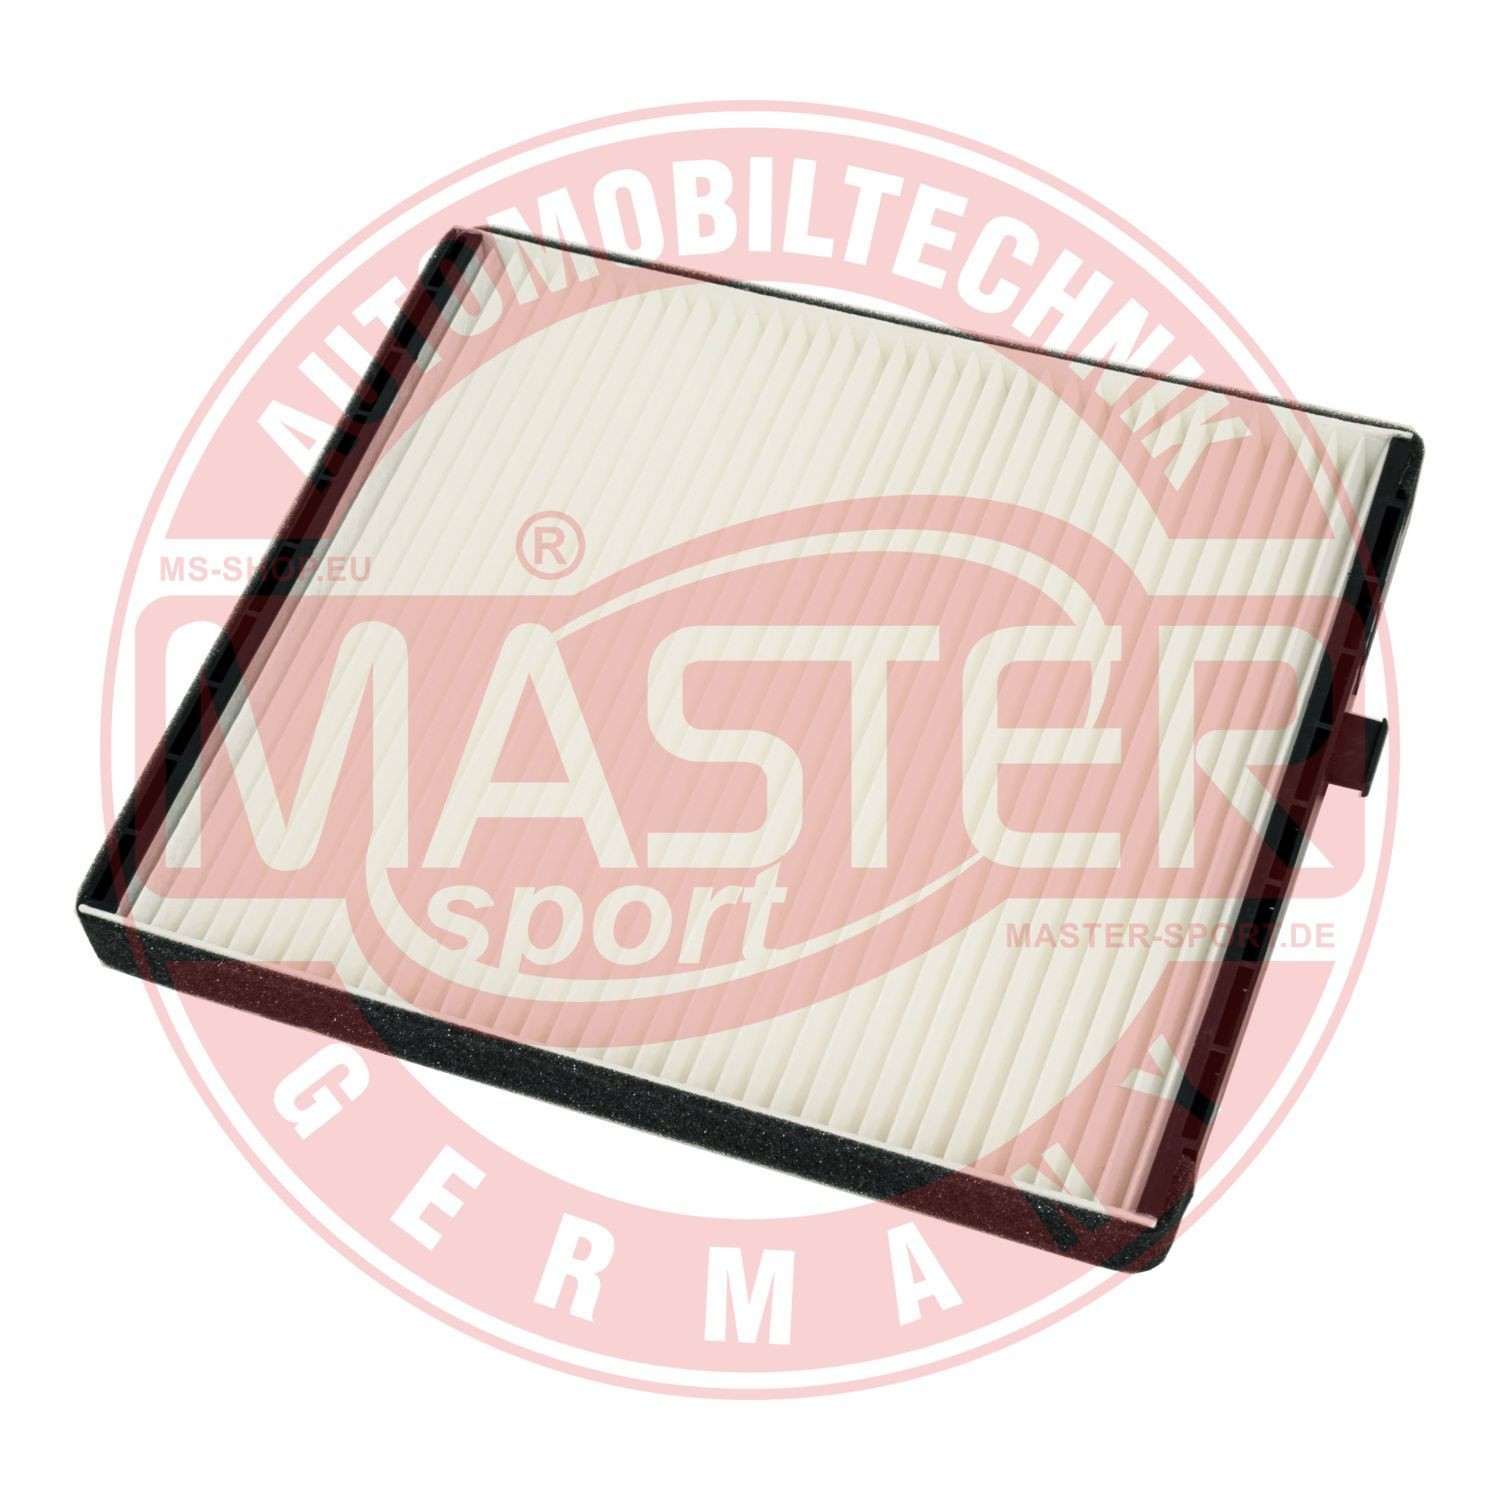 MASTER-SPORT Air conditioning filter 2839-IF-PCS-MS